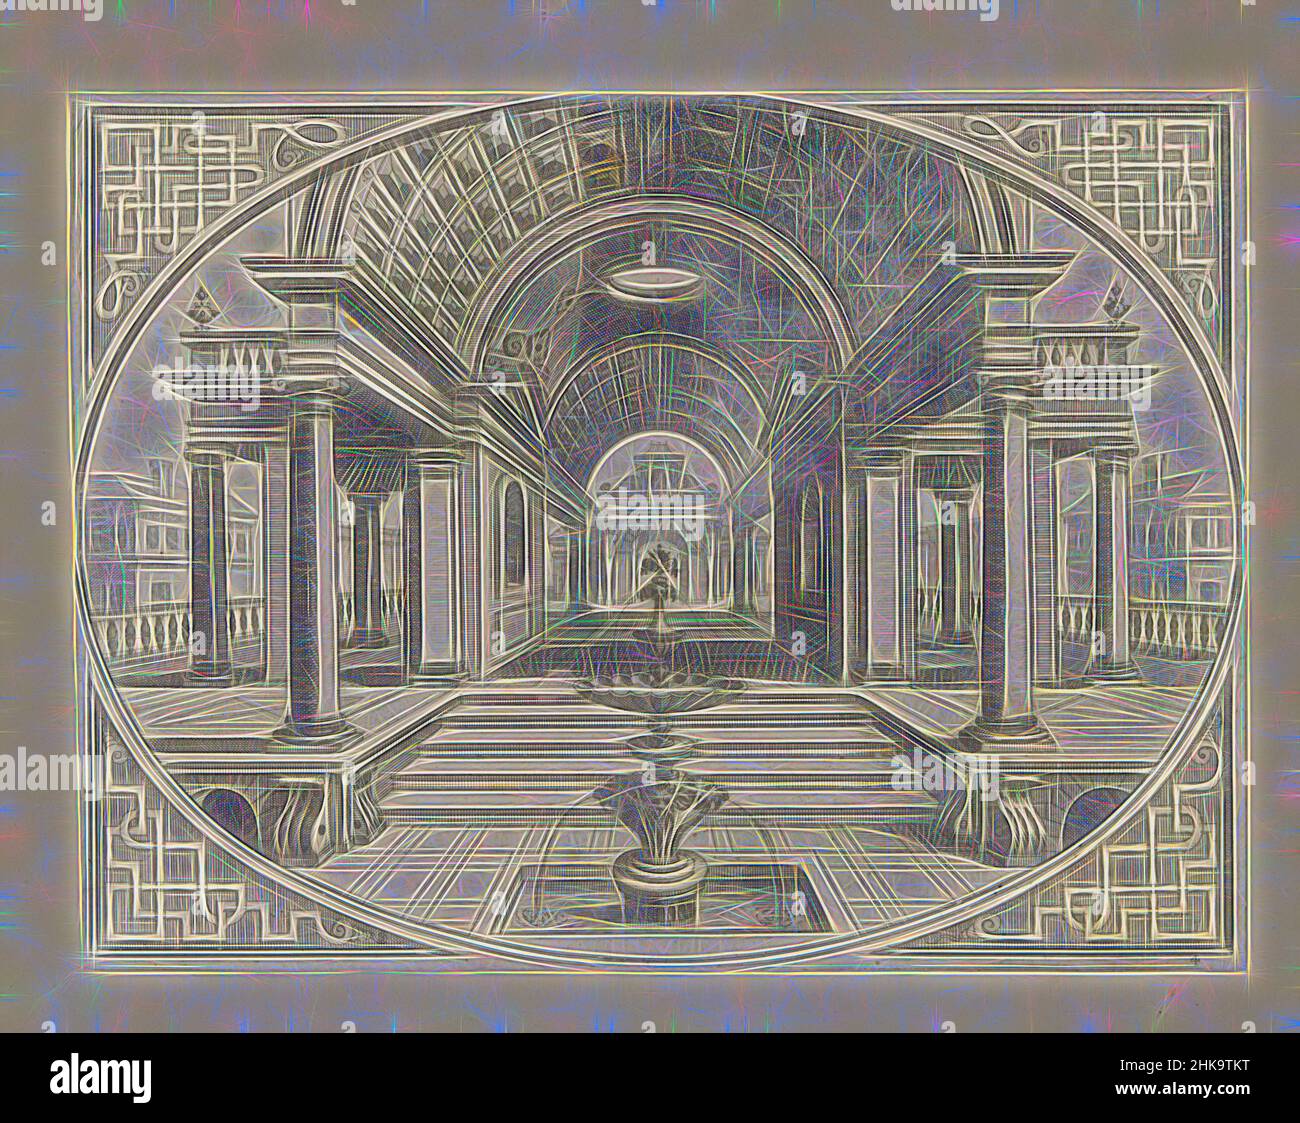 Inspired by Open hall with tunnel vault and fountain in the foreground, Variae Architecturae Formae (...), Architectural perspectives in oval frames for intarsia, Open hall with a tunnel vault. The front and rear parts of the vault are decorated with cassettes. In the center is an oculus. In the, Reimagined by Artotop. Classic art reinvented with a modern twist. Design of warm cheerful glowing of brightness and light ray radiance. Photography inspired by surrealism and futurism, embracing dynamic energy of modern technology, movement, speed and revolutionize culture Stock Photo